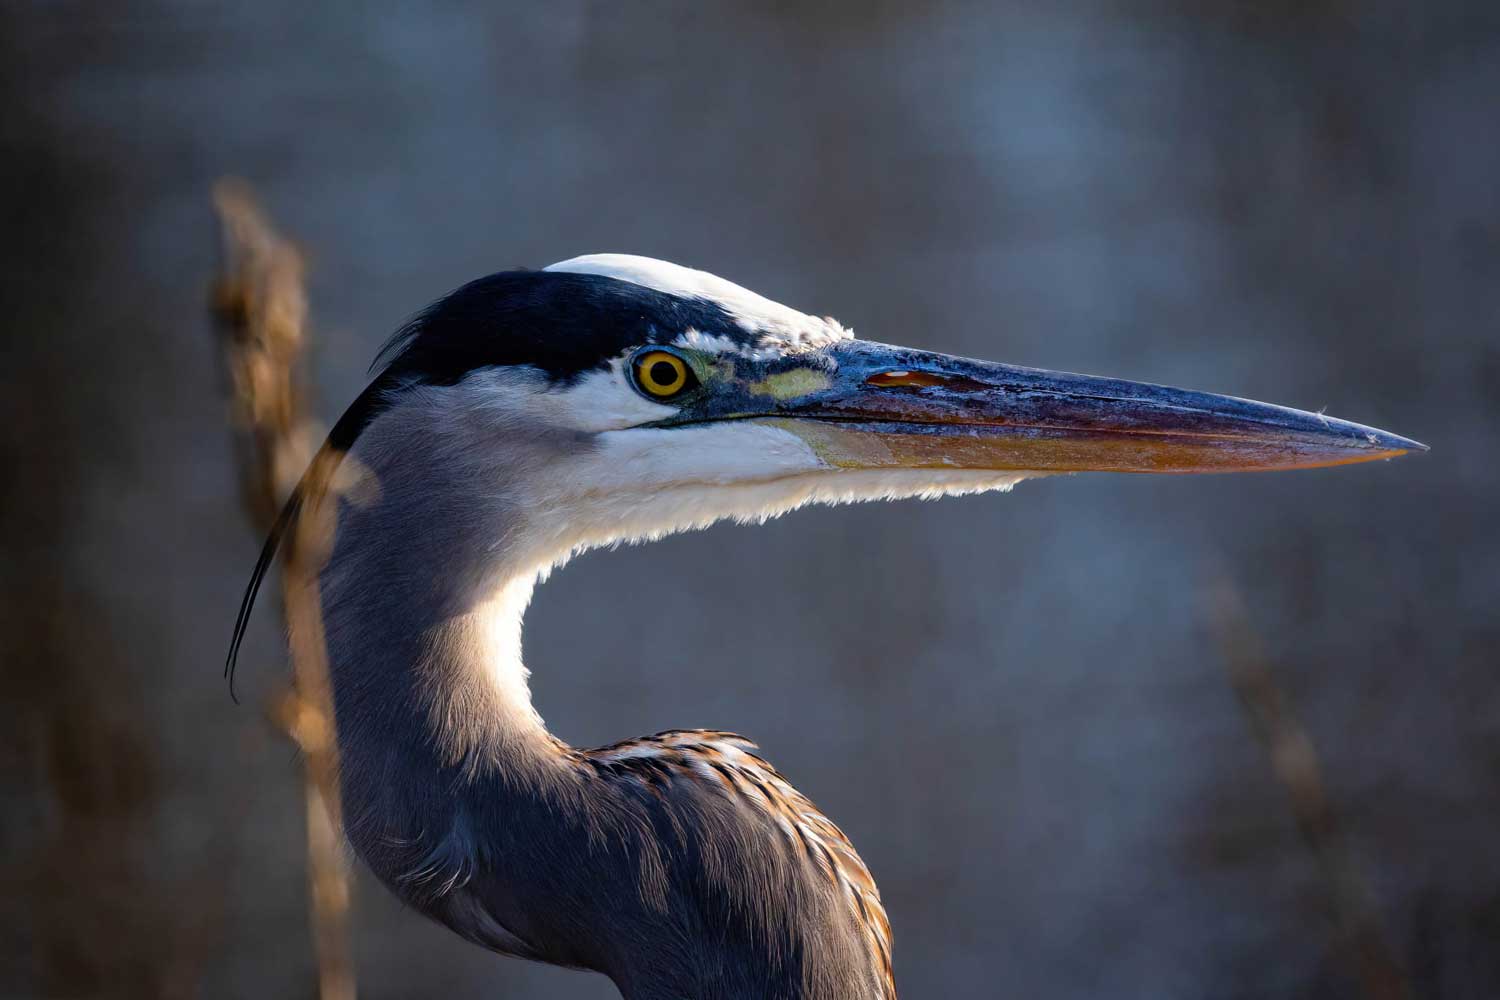 A close-up of a great blue heron's face.